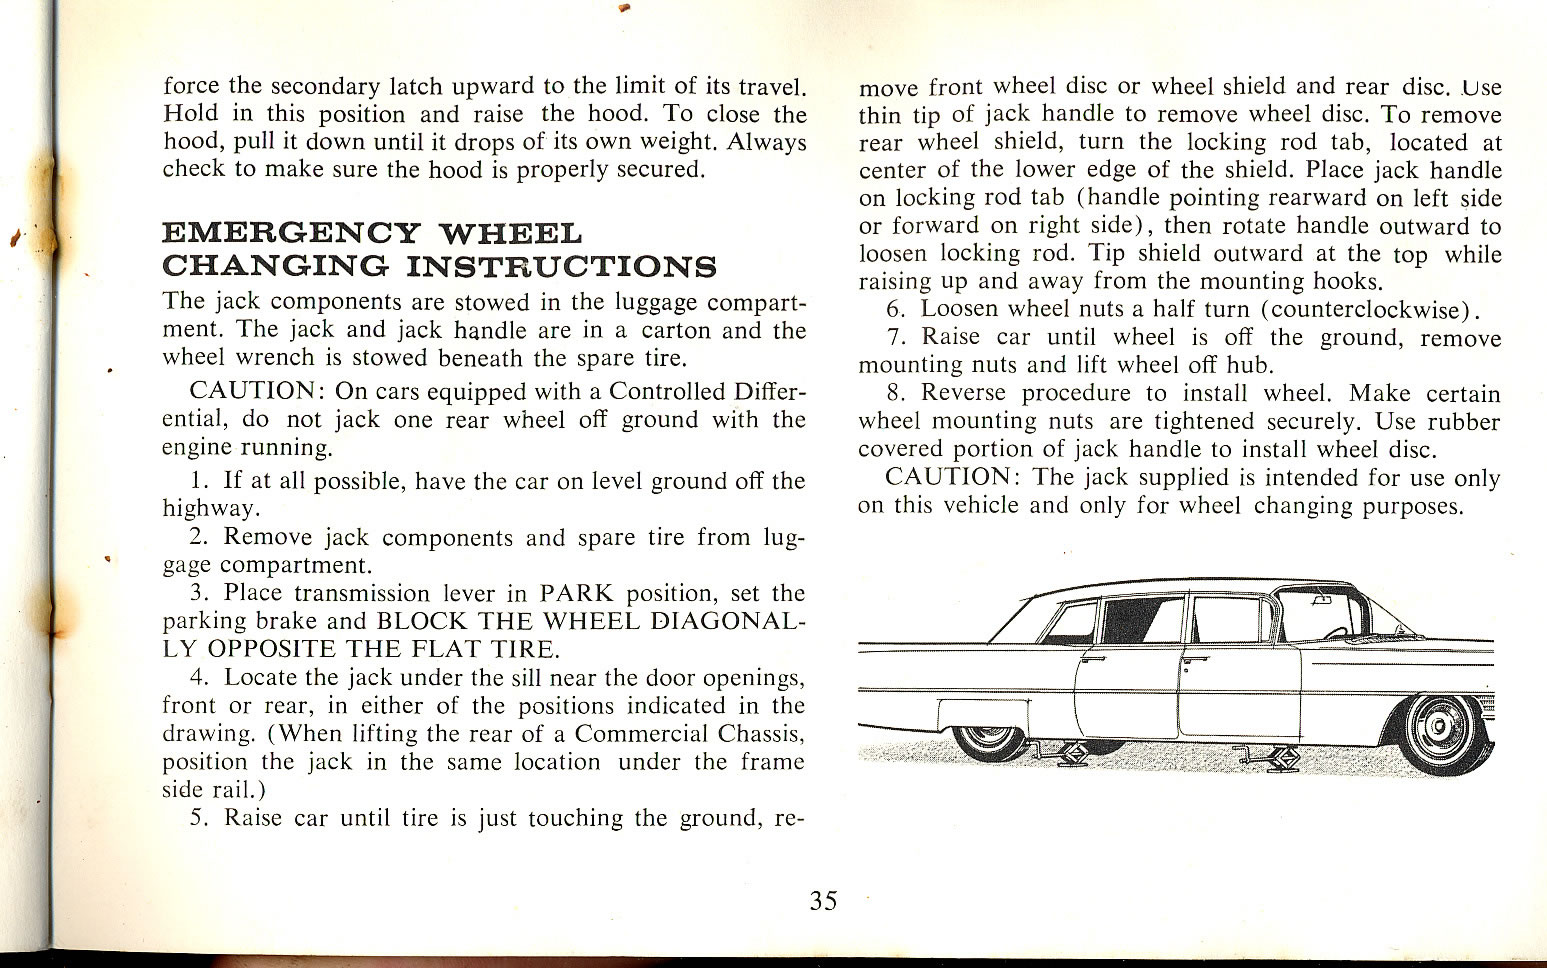 1965 Cadillac Owners Manual Page 11